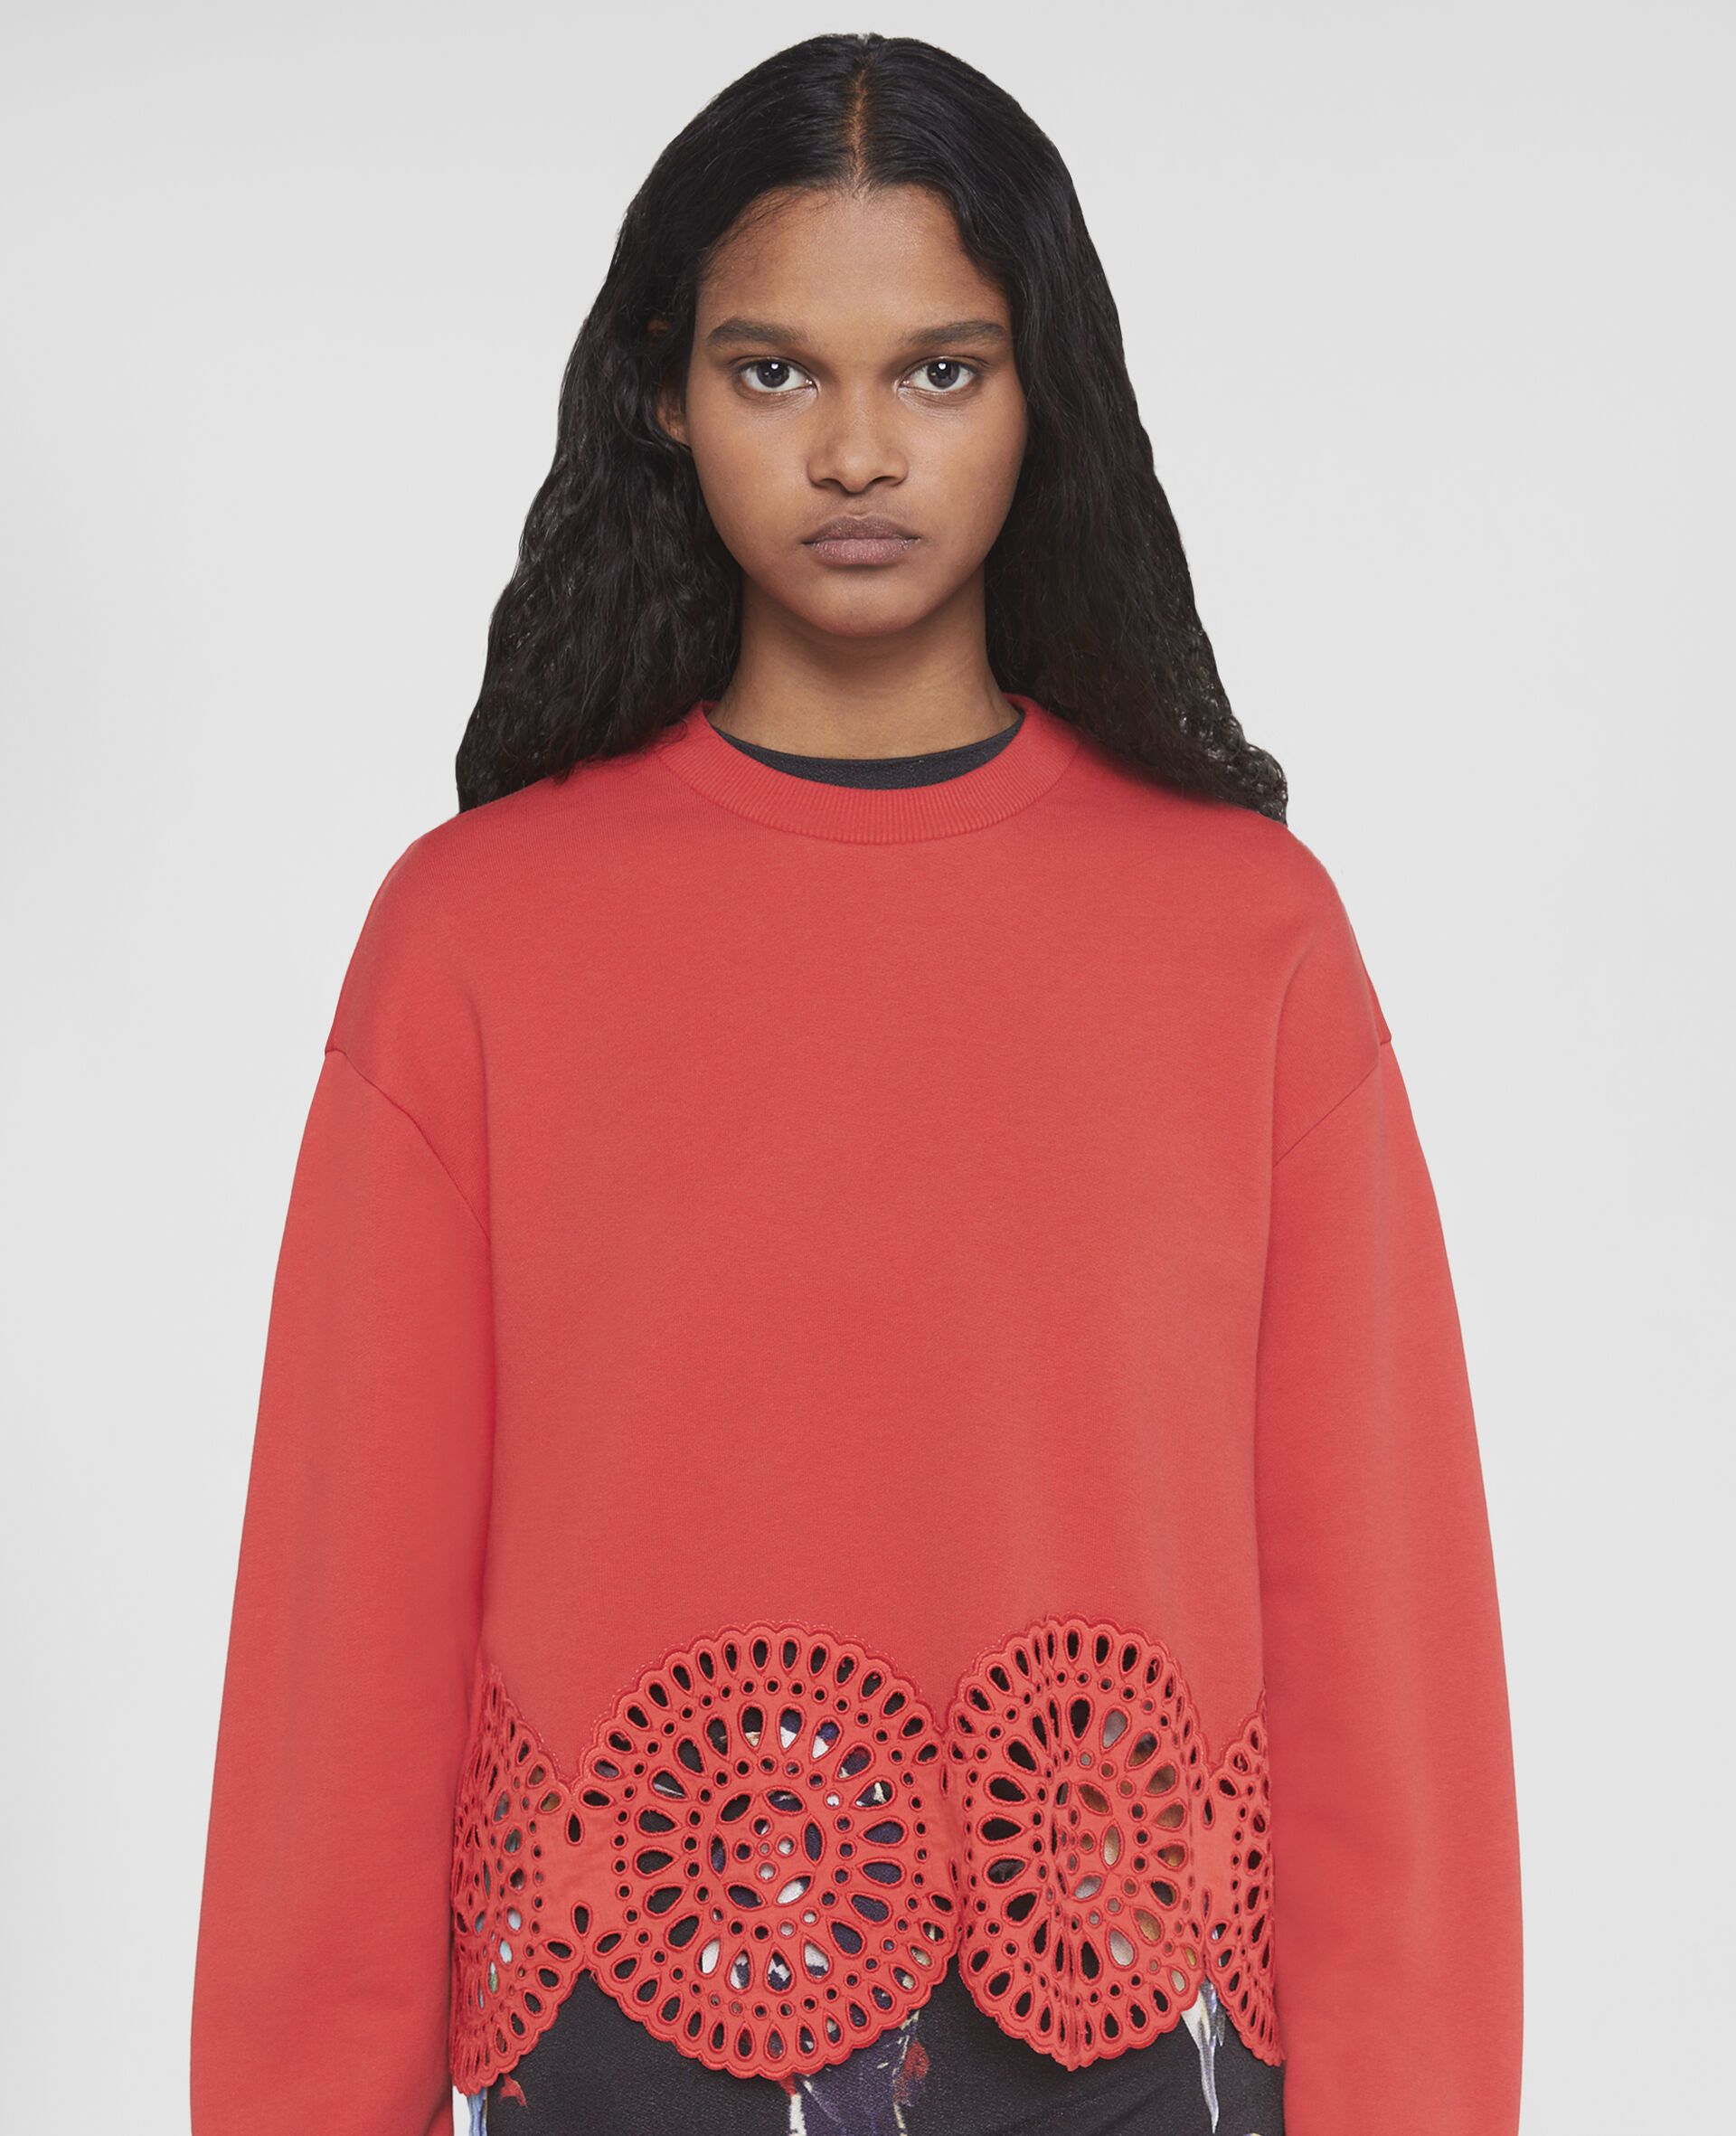 Broderie Anglaise Jersey Sweatshirt-Red-large image number 3